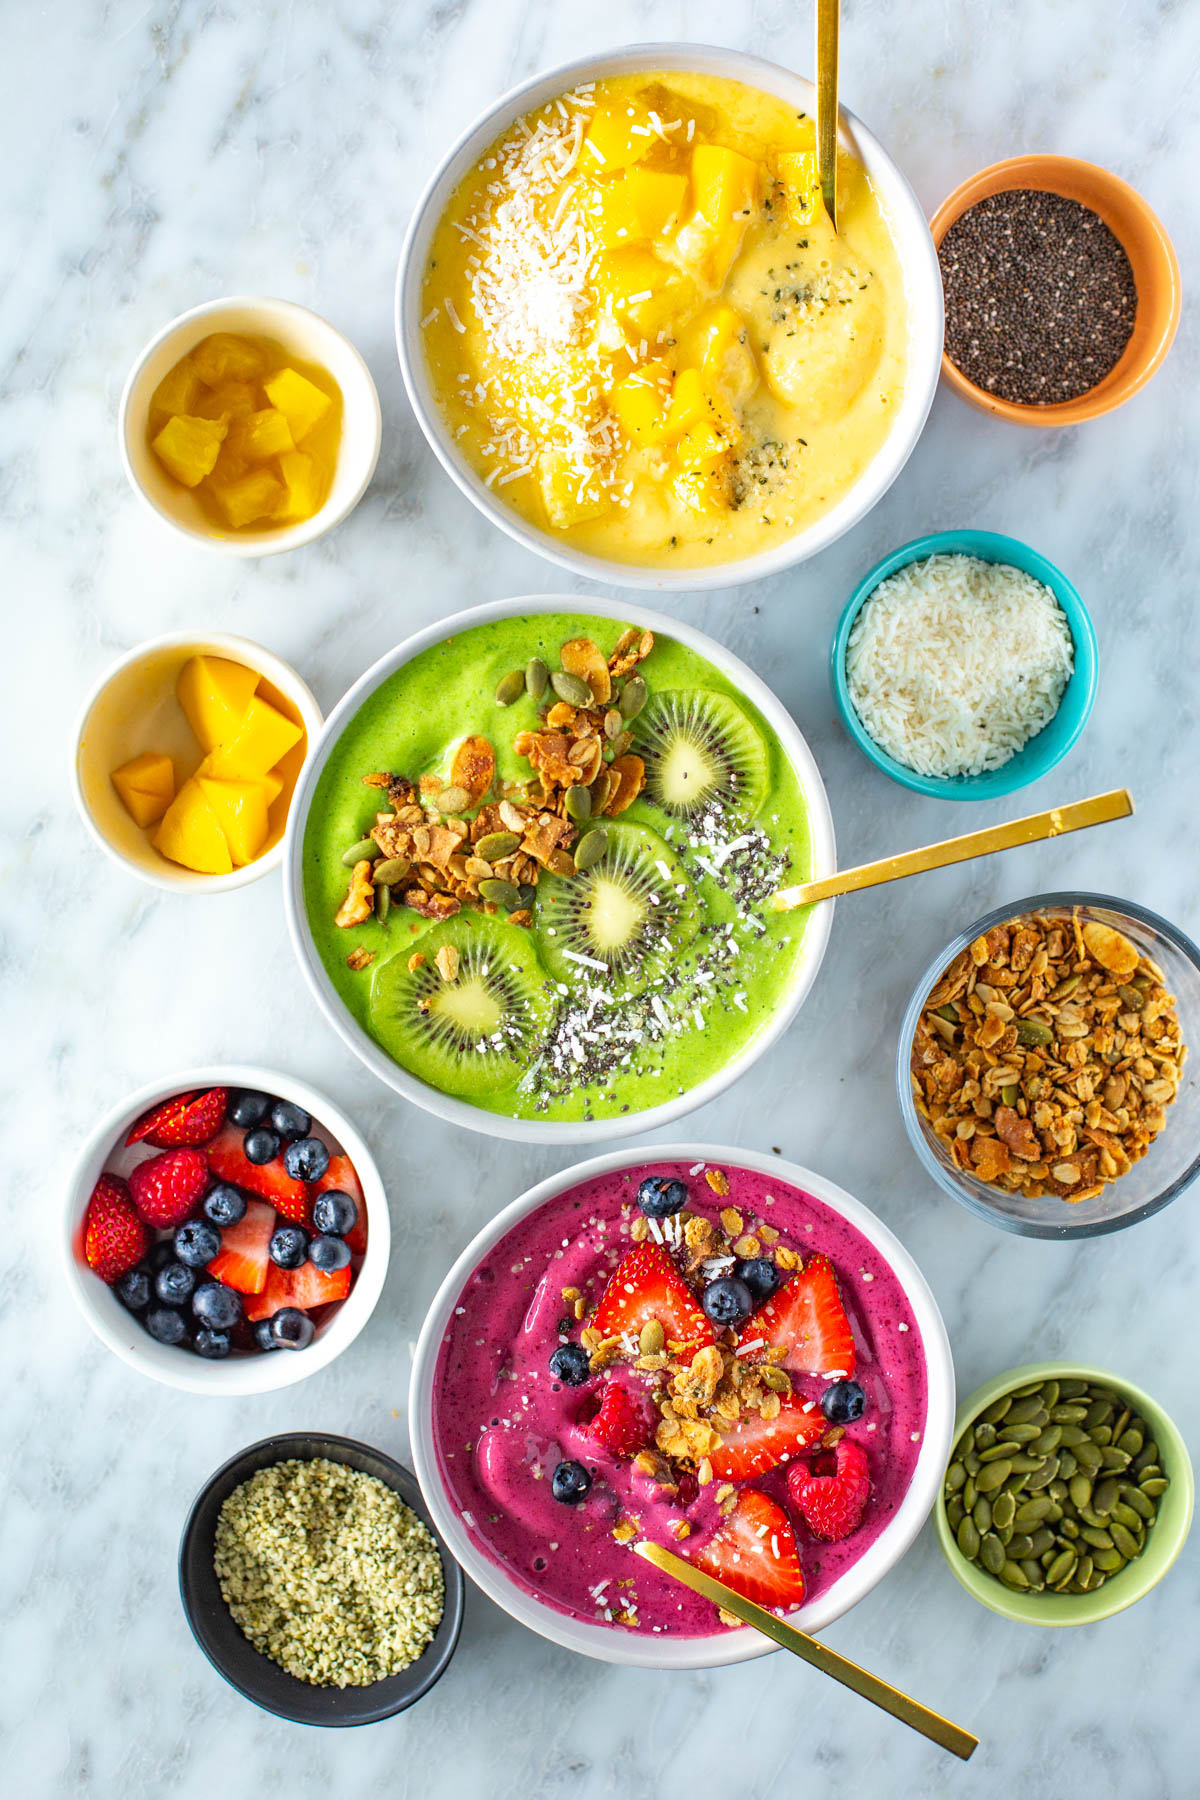 Three smoothie bowls, one yellow, one green and one pink, with various toppings.